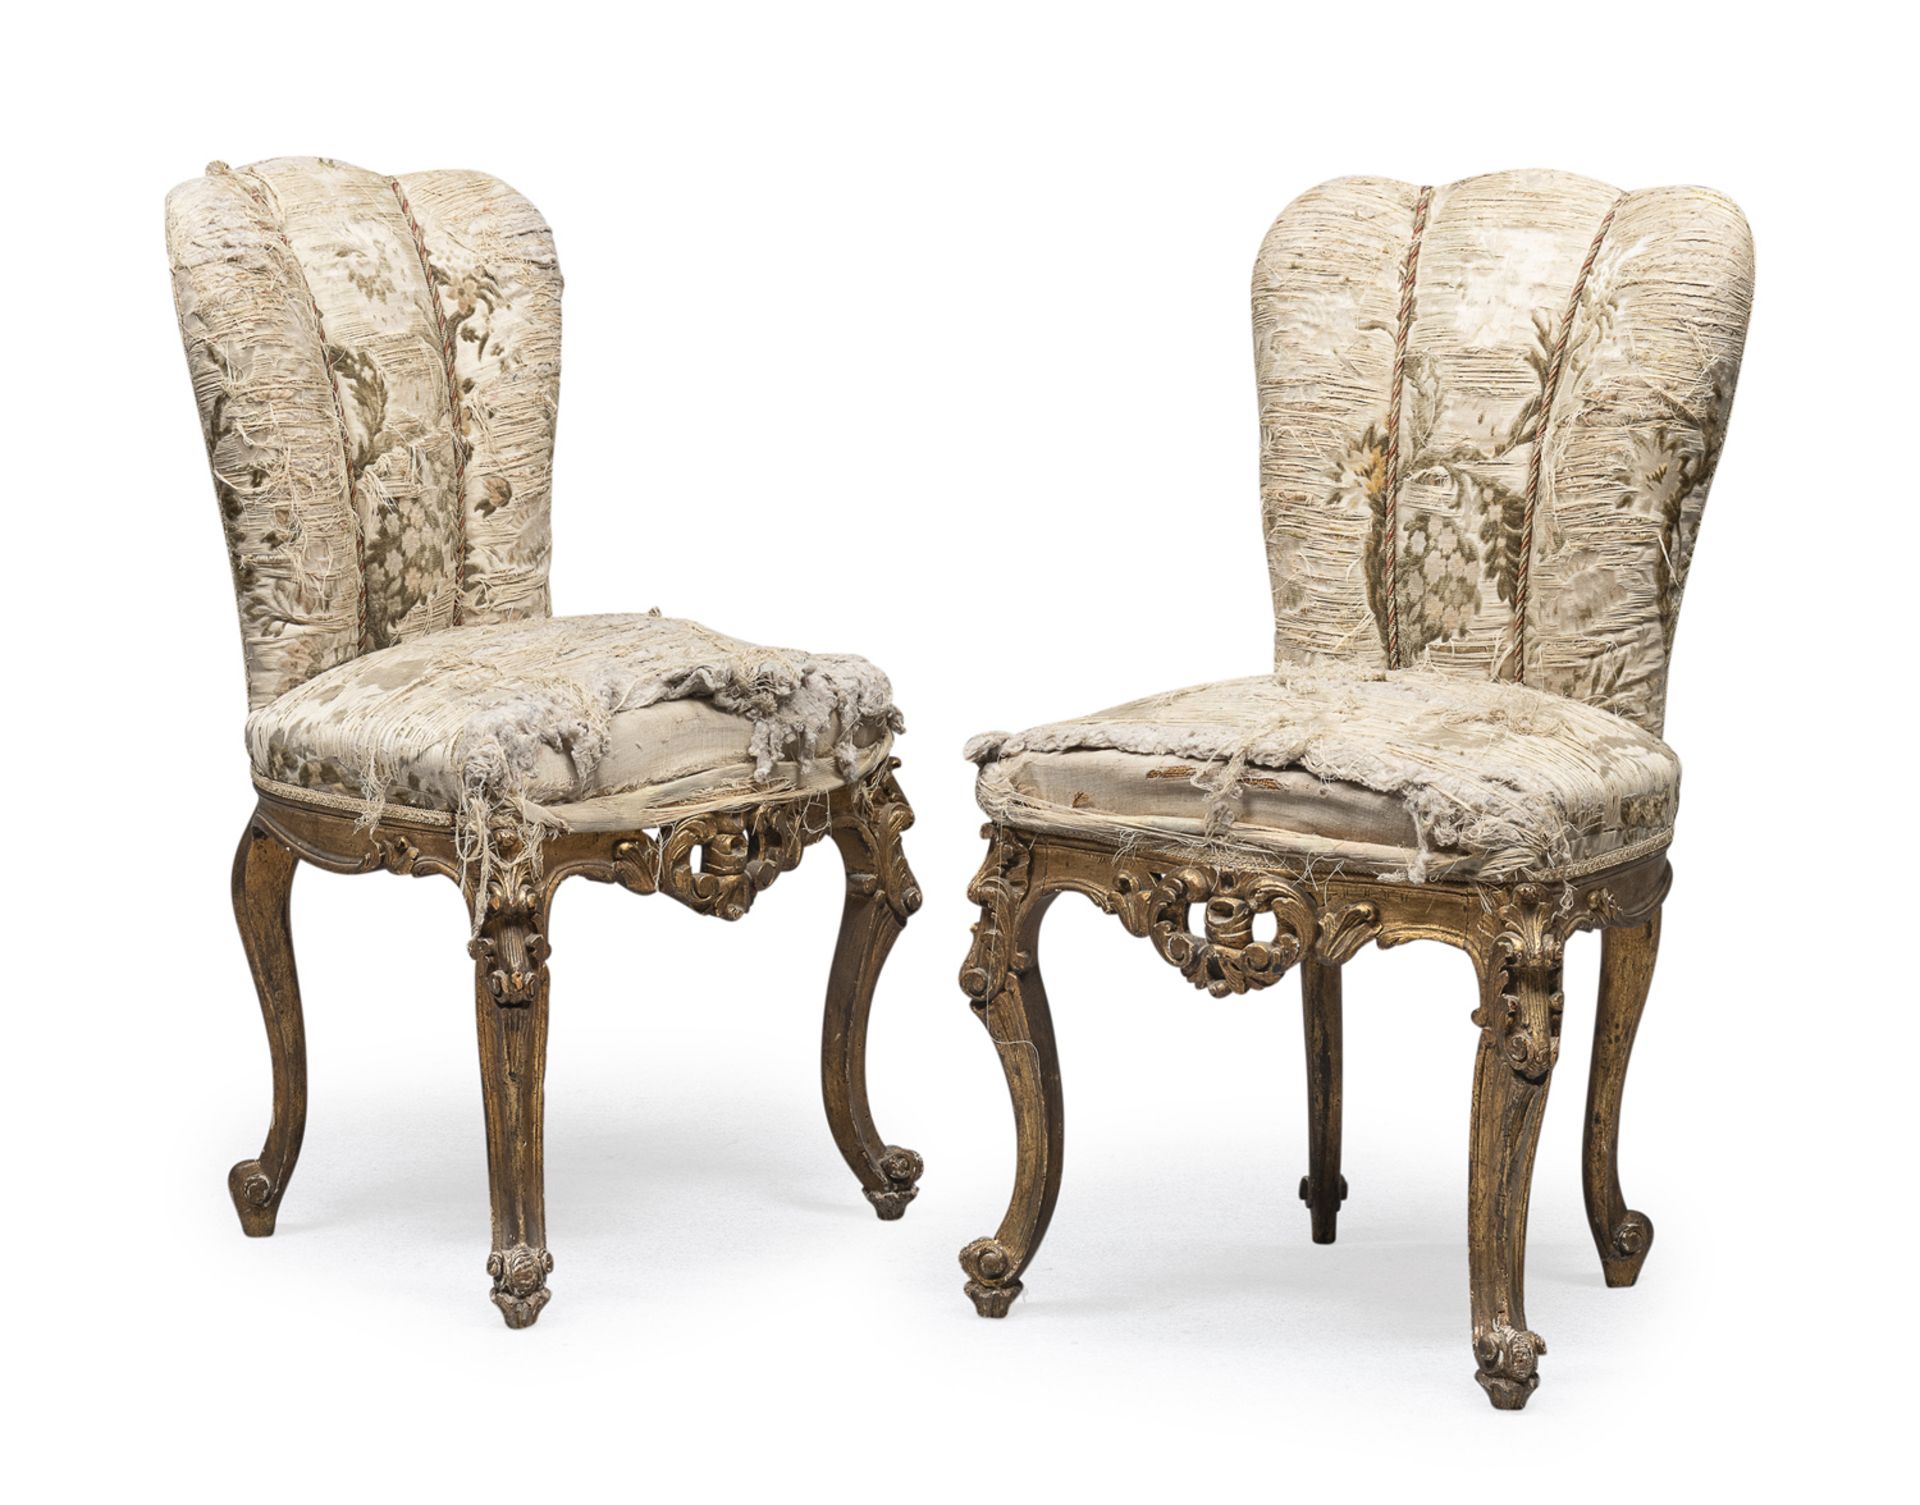 PAIR OF GILTWOODEN CHAIRS